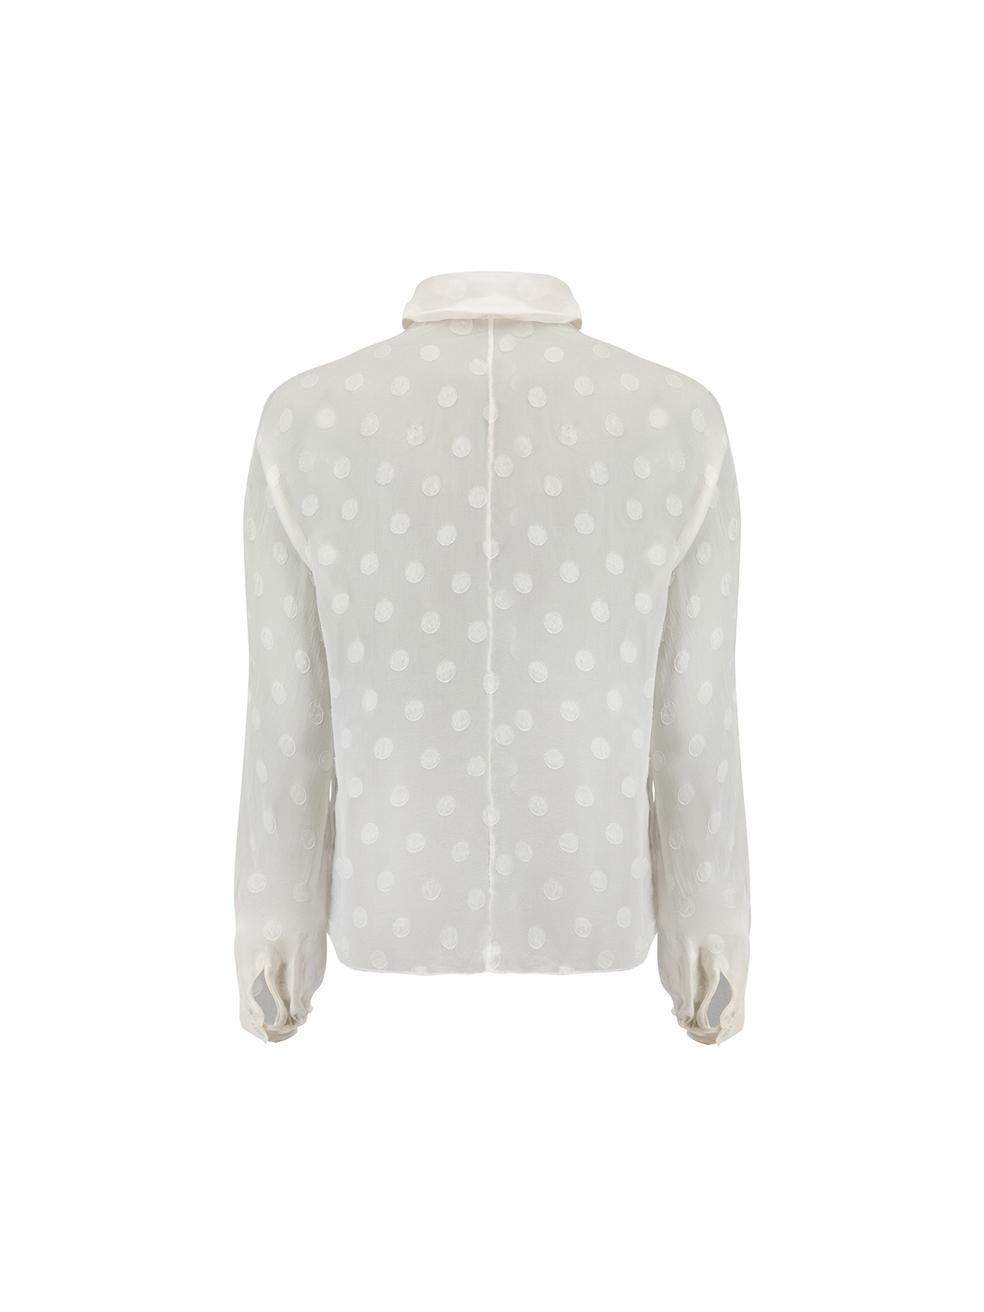 Dolce & Gabbana White Silk Polka Dot Sheer Blouse Size S In Good Condition For Sale In London, GB